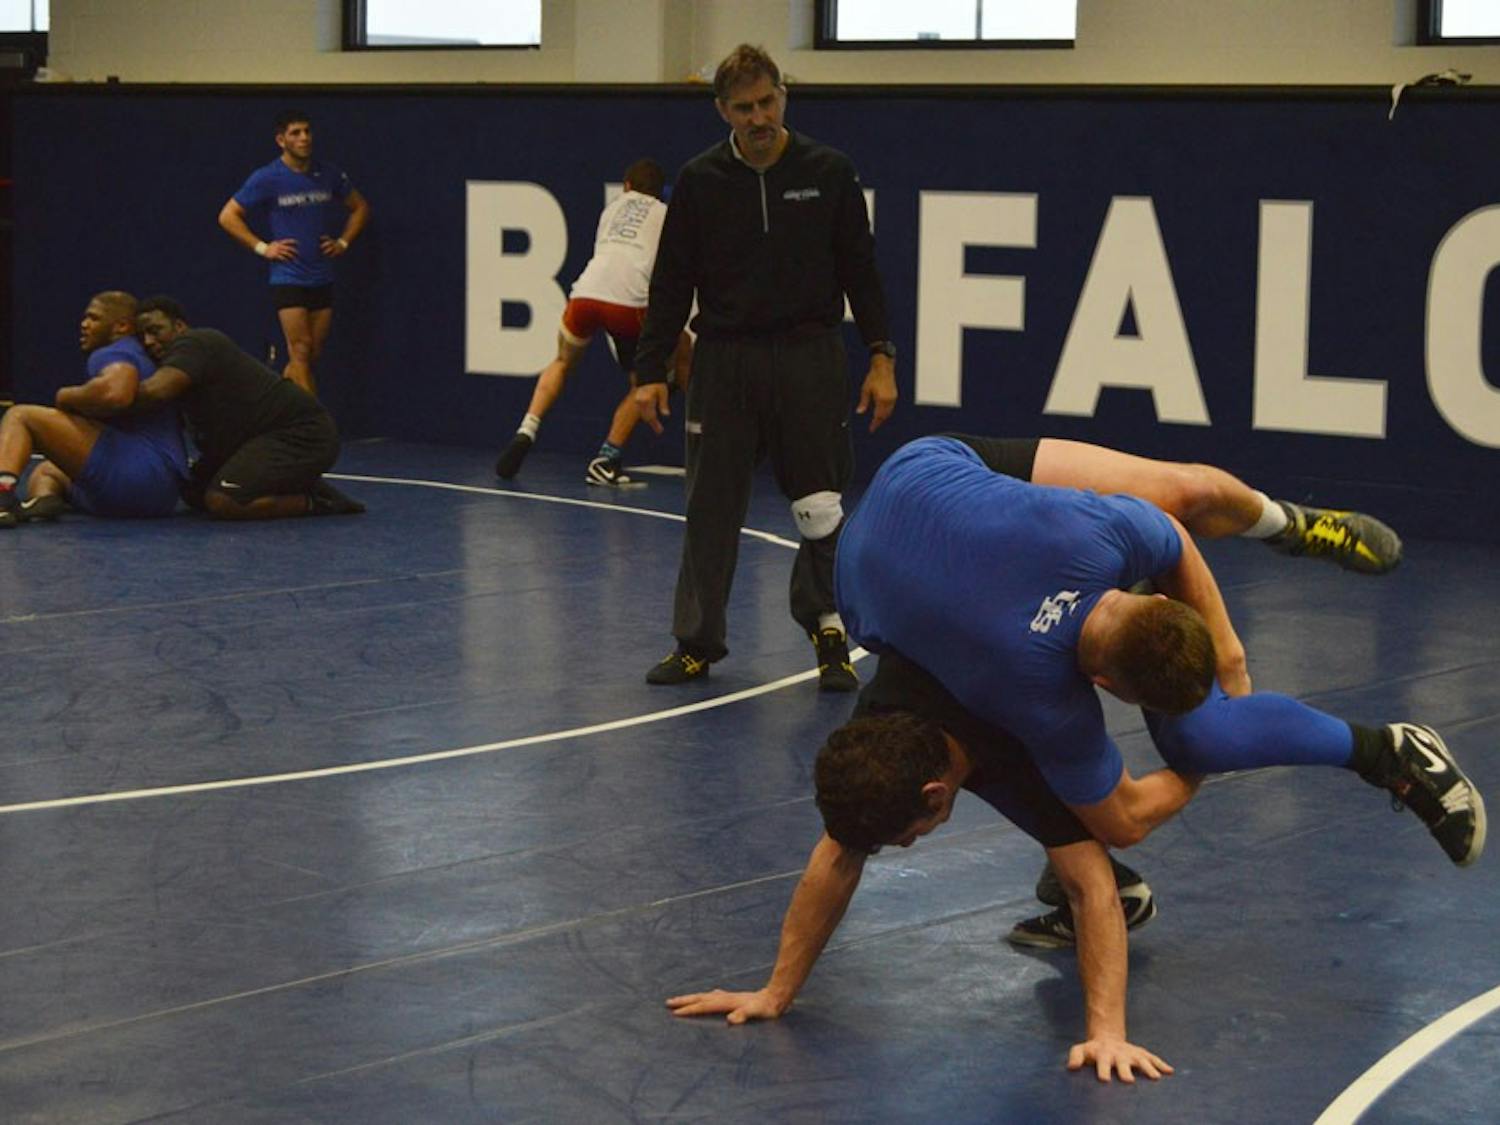 The Bulls train for their upcoming match. Buffalo will take on Central Michigan this Friday at 7 p.m. in Alumni Arena.